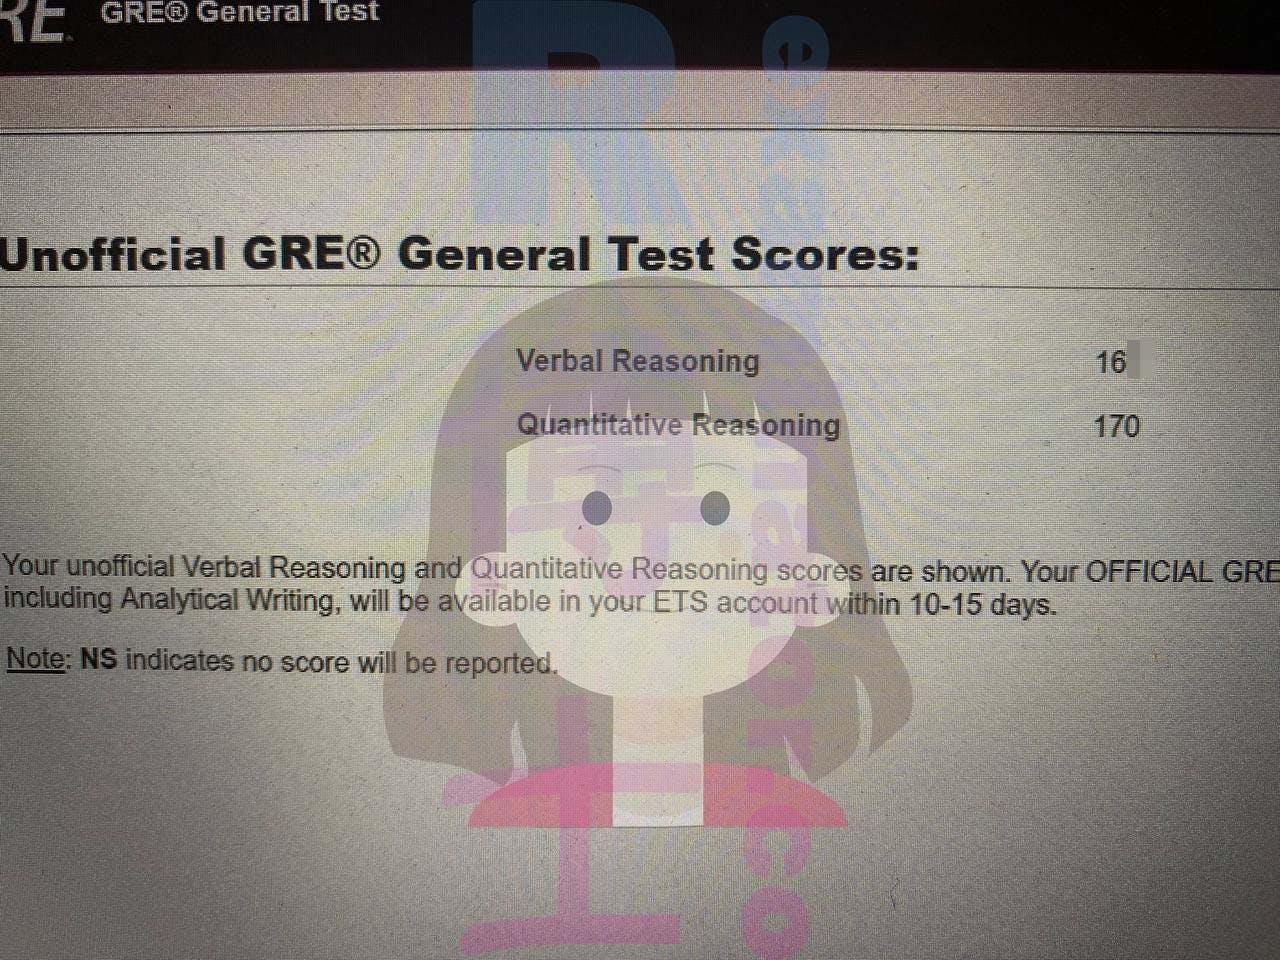 🇺🇸 From Computer Woes🚨 to GRE Success: Florida Customer Achieves Exceptional Score of 337+ with Our Top Proxy Testing Expert 🏆